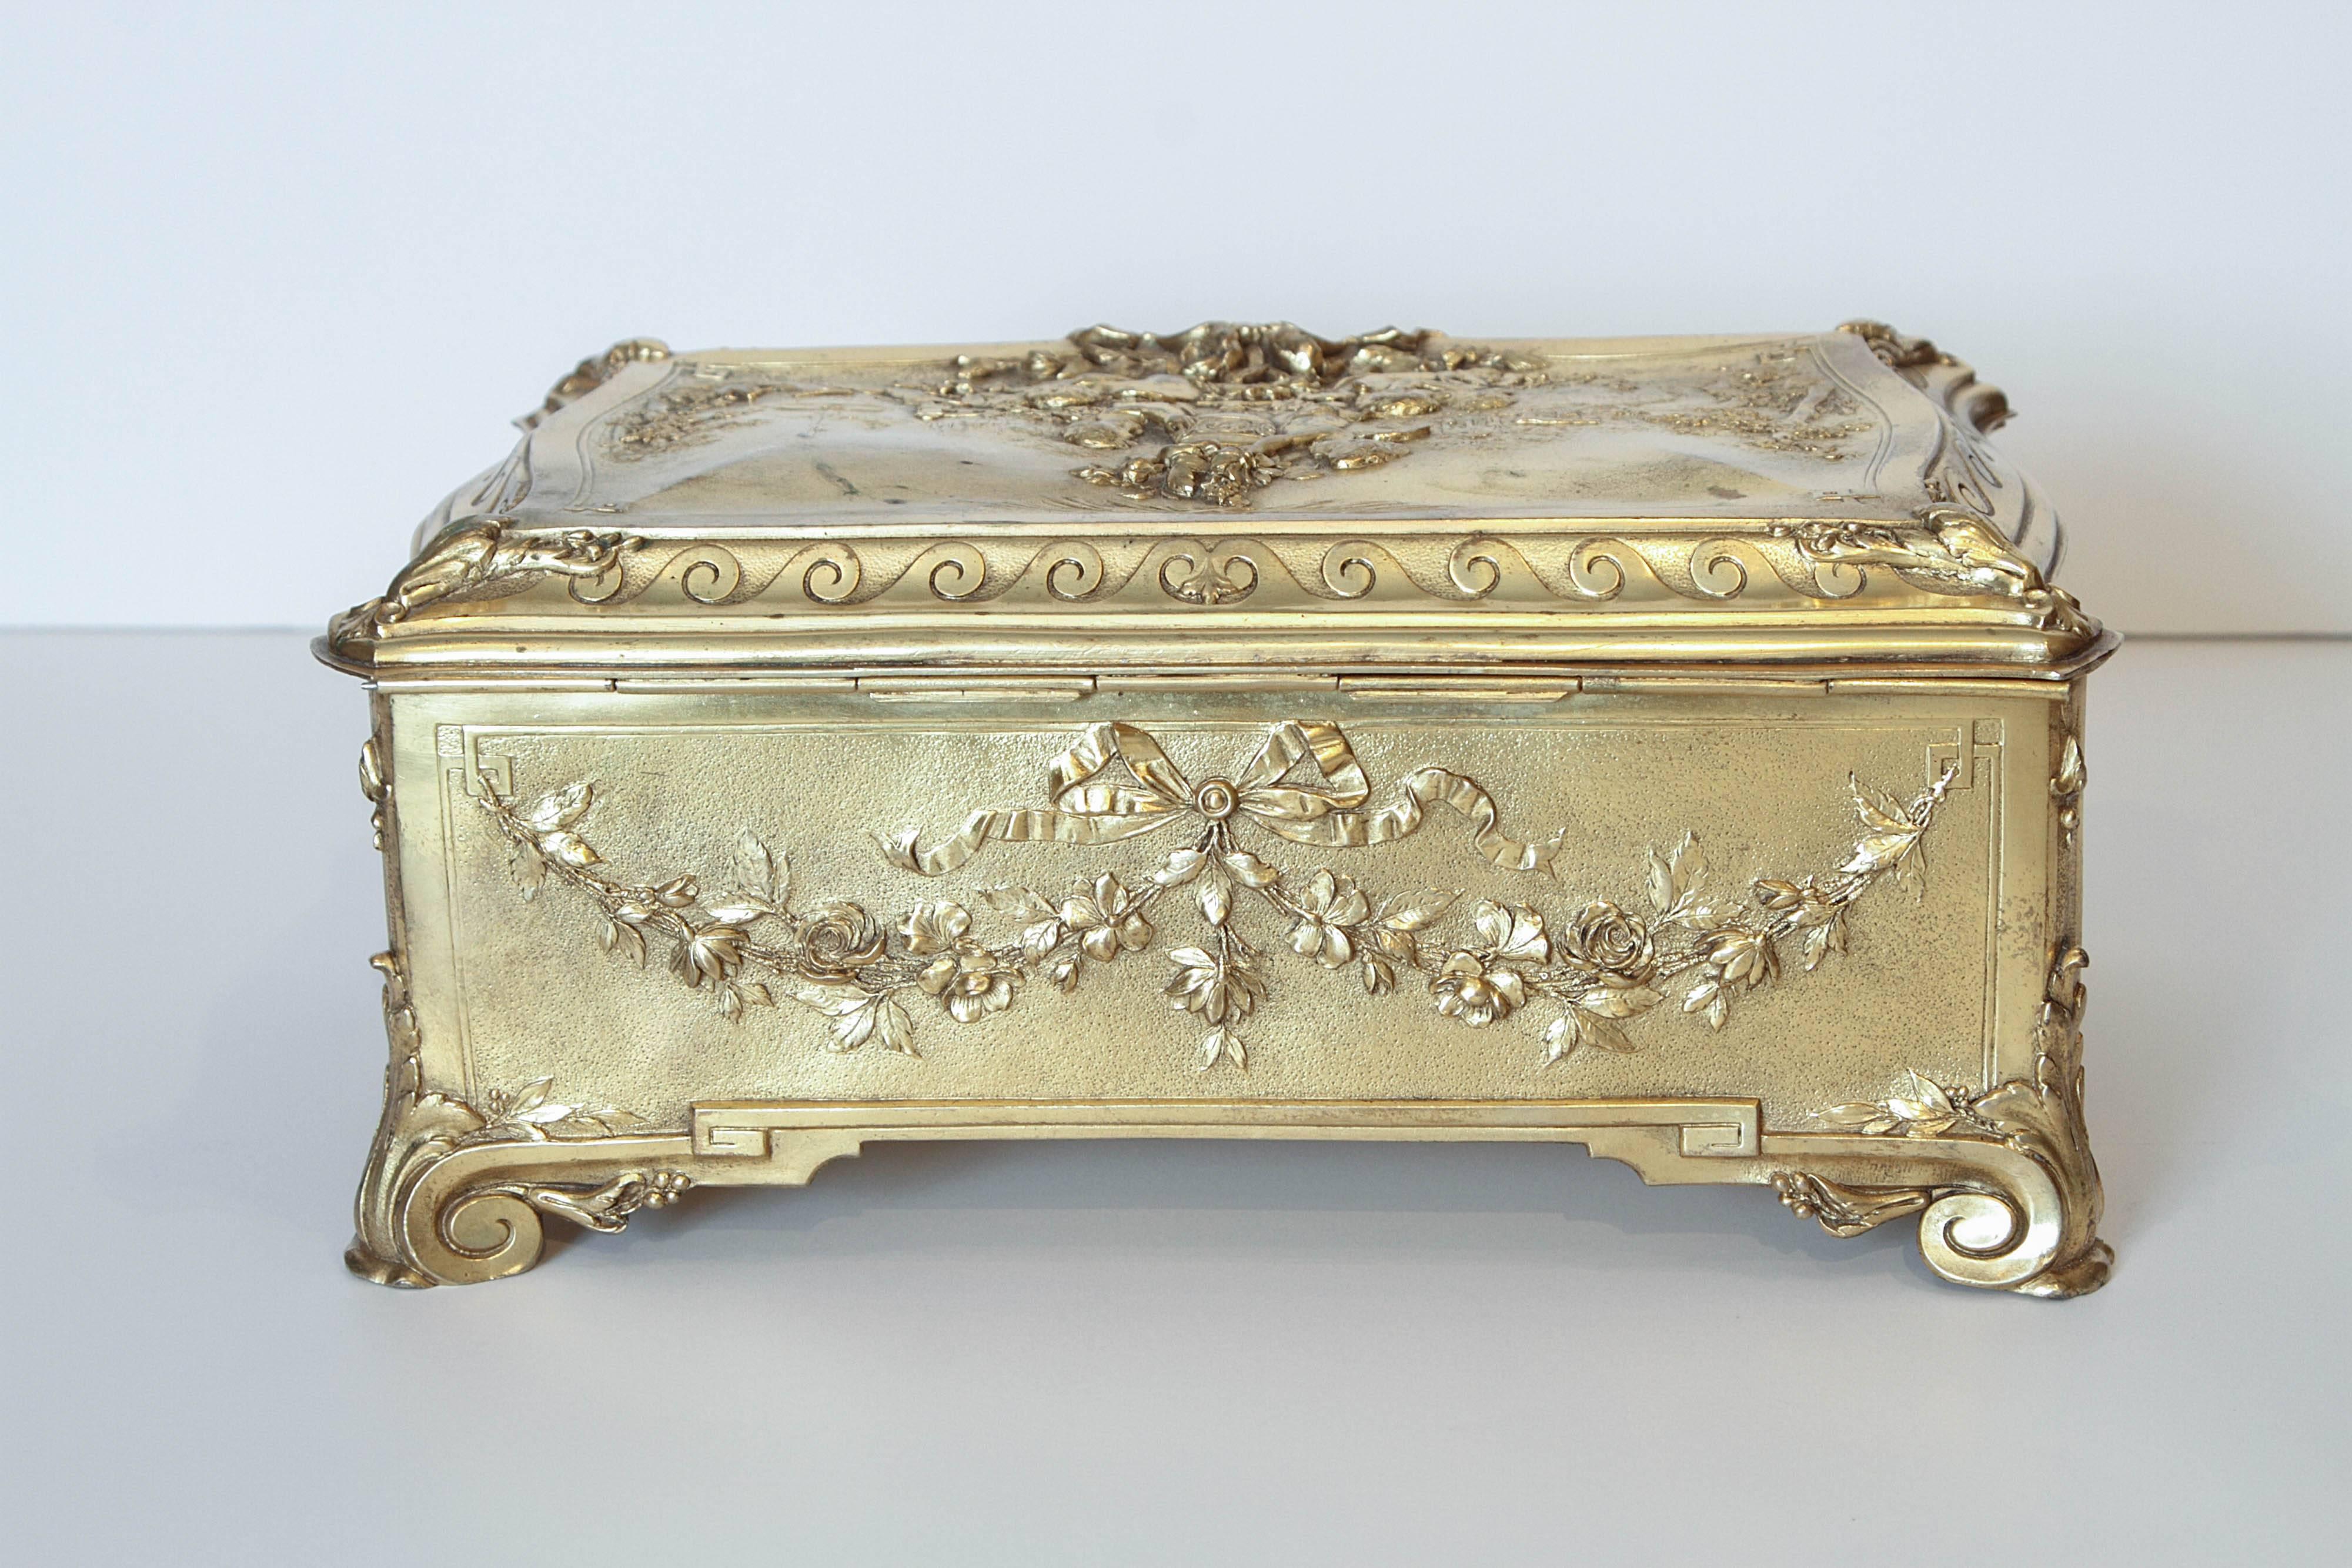 19th Century French Large and Finely Gilt Bronze Casket For Sale 1